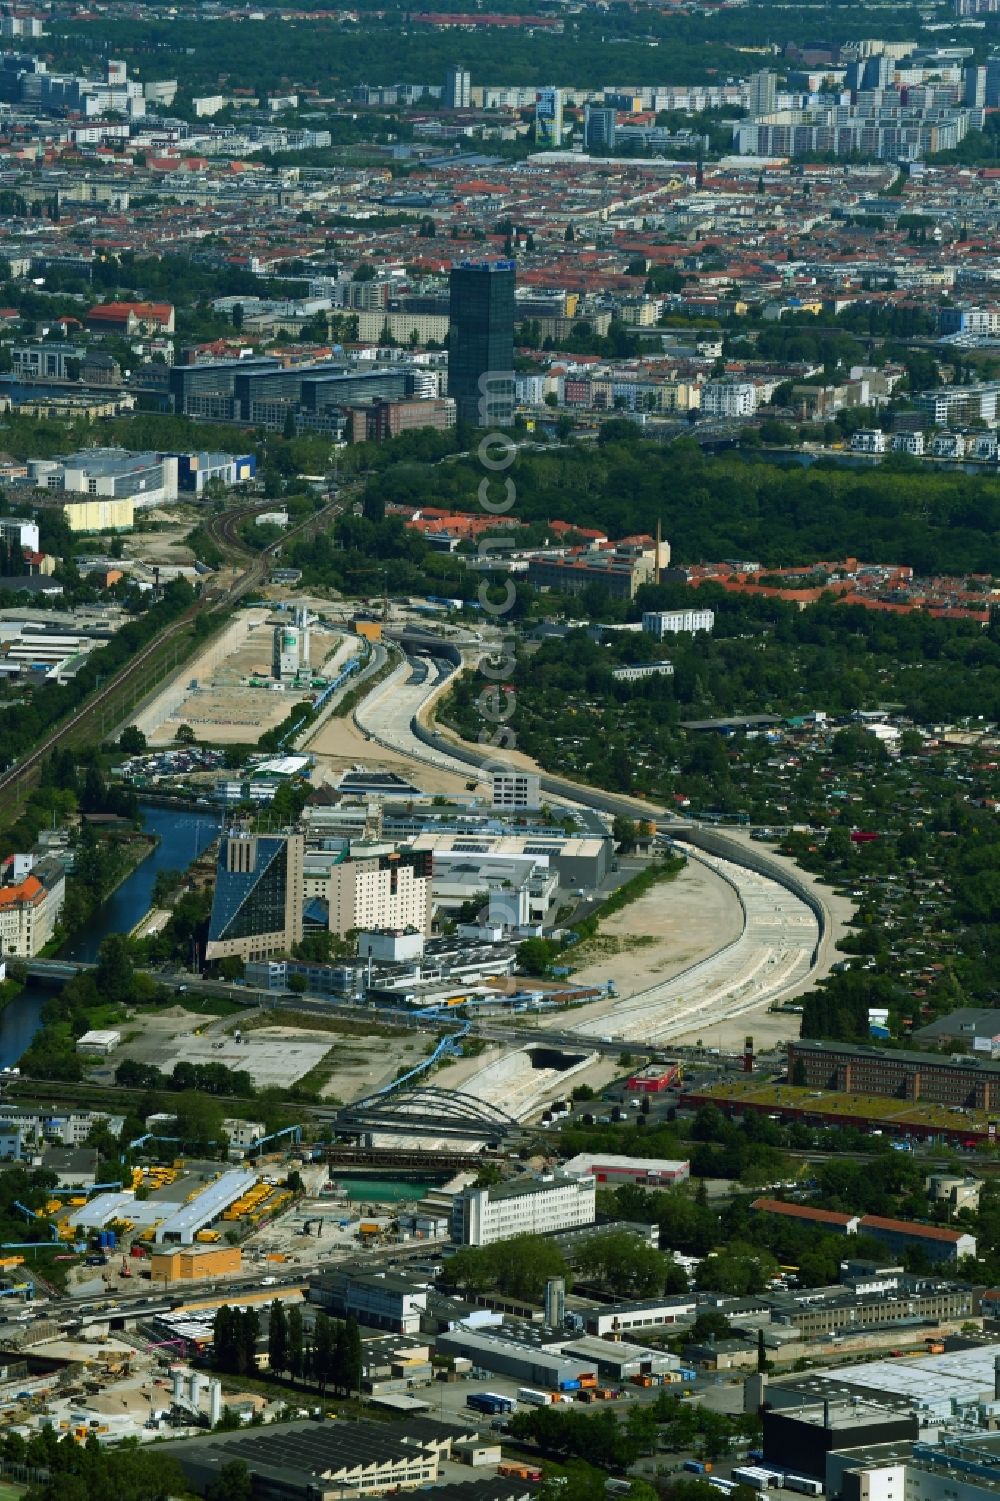 Aerial photograph Berlin - Civil engineering construction sites for construction of the extension of the urban motorway - Autobahn Autobahn A100 in Berlin Neukoelln